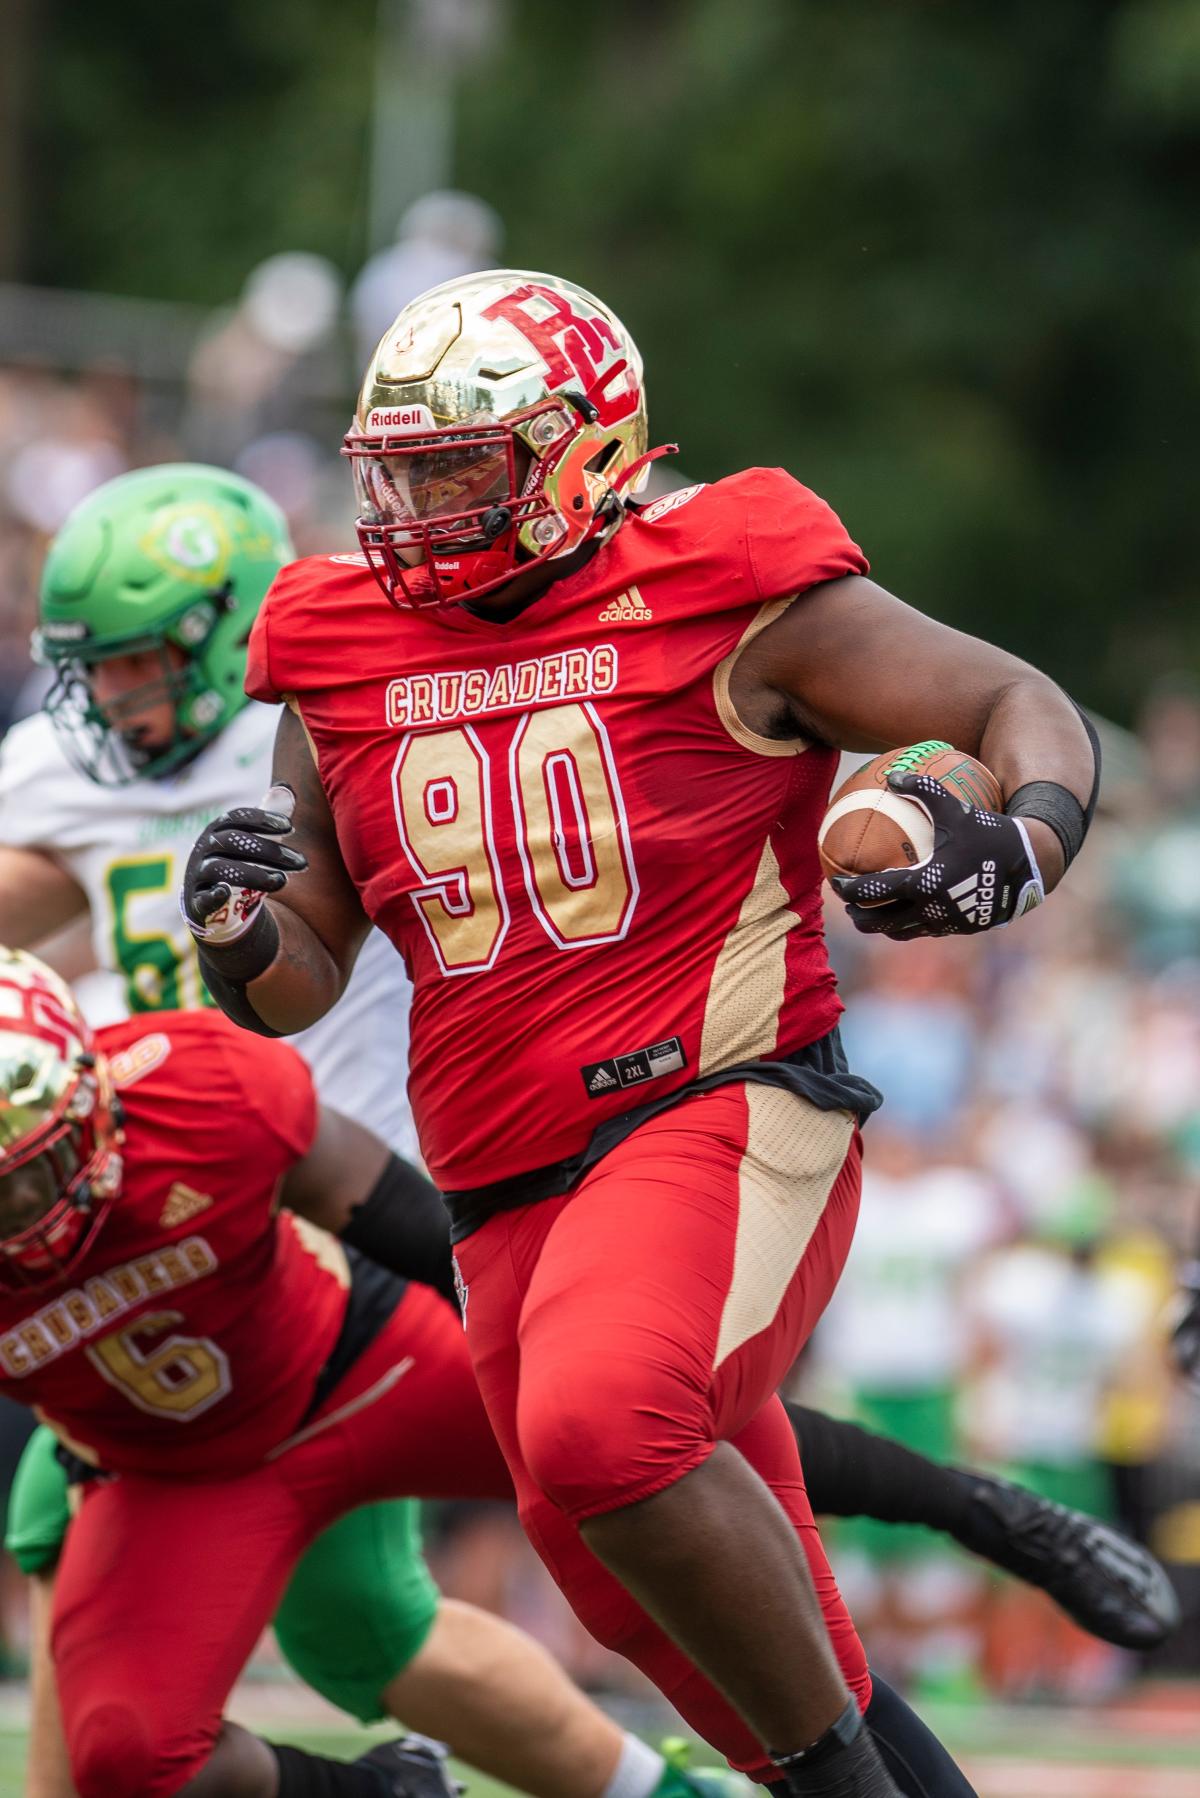 Bergen Catholic football scores from a variety of places to dominate